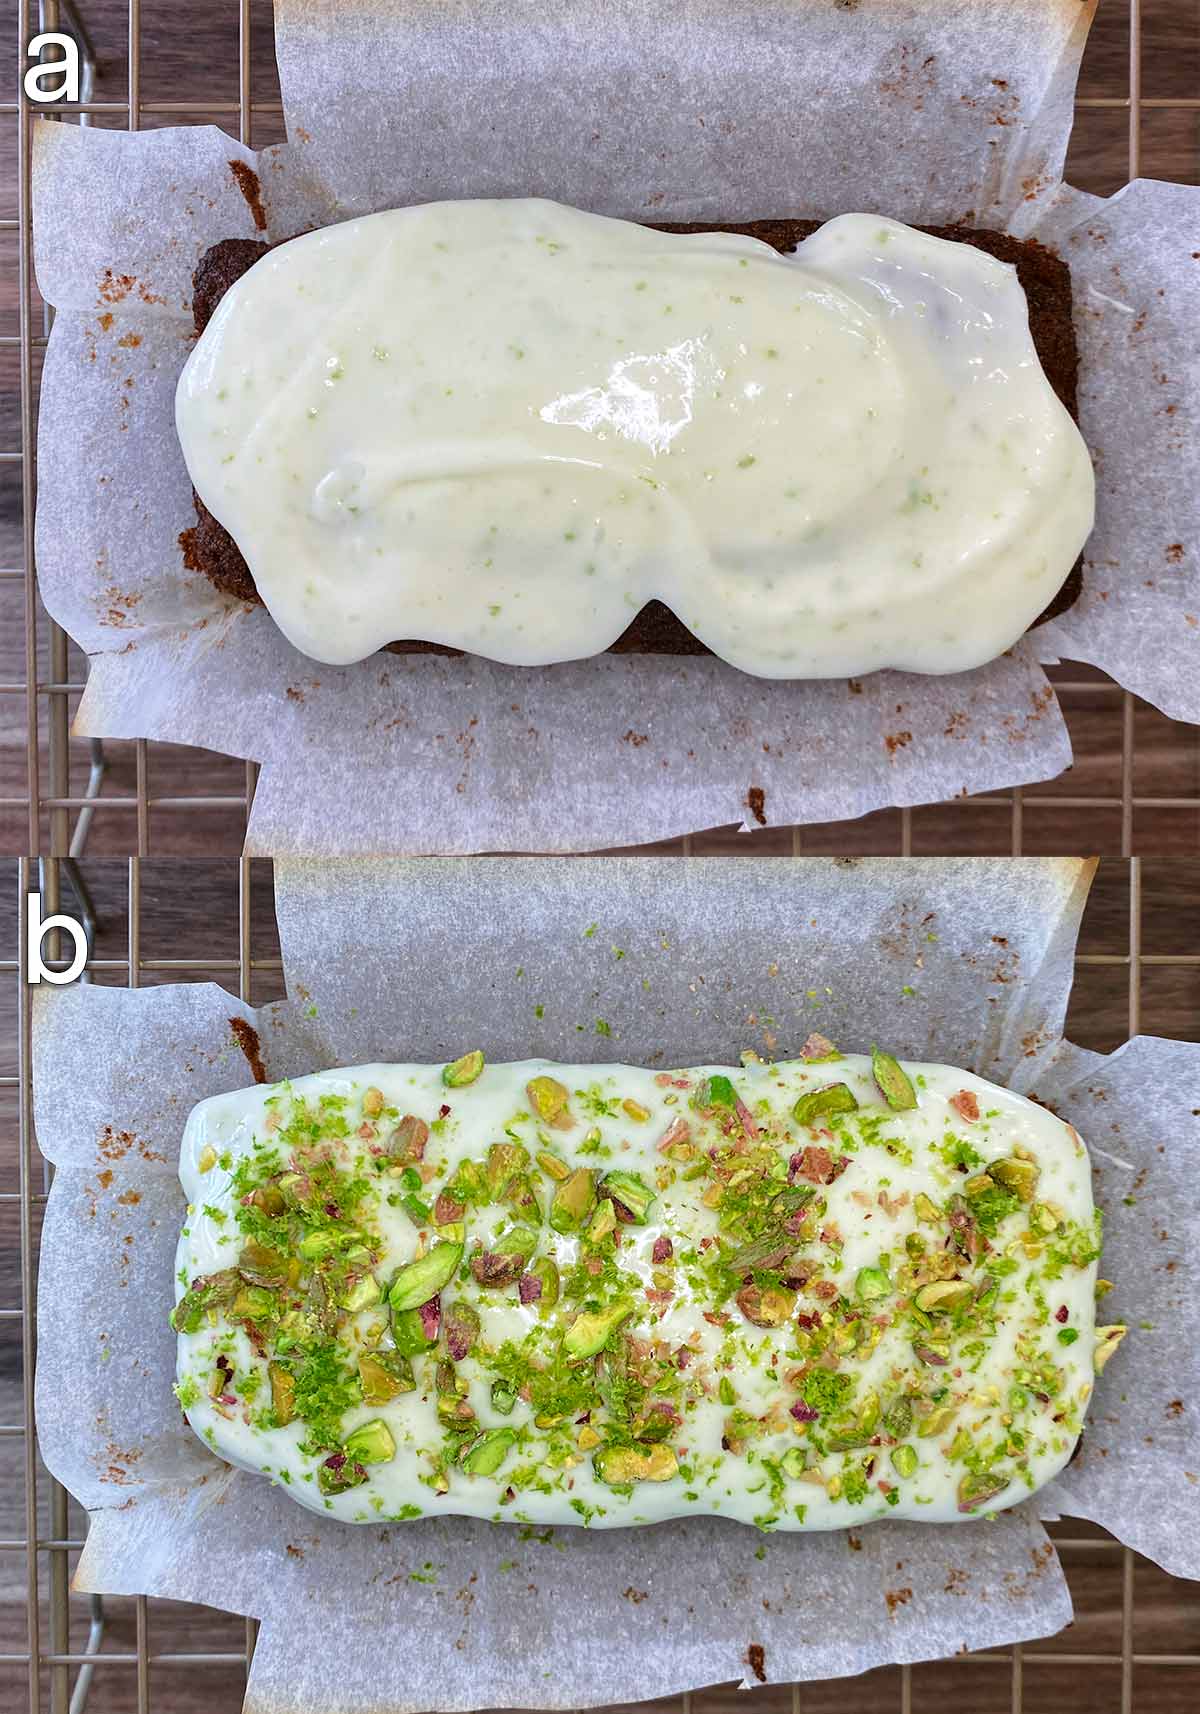 Frosting spread over the cake then topped with crushed pistachios.